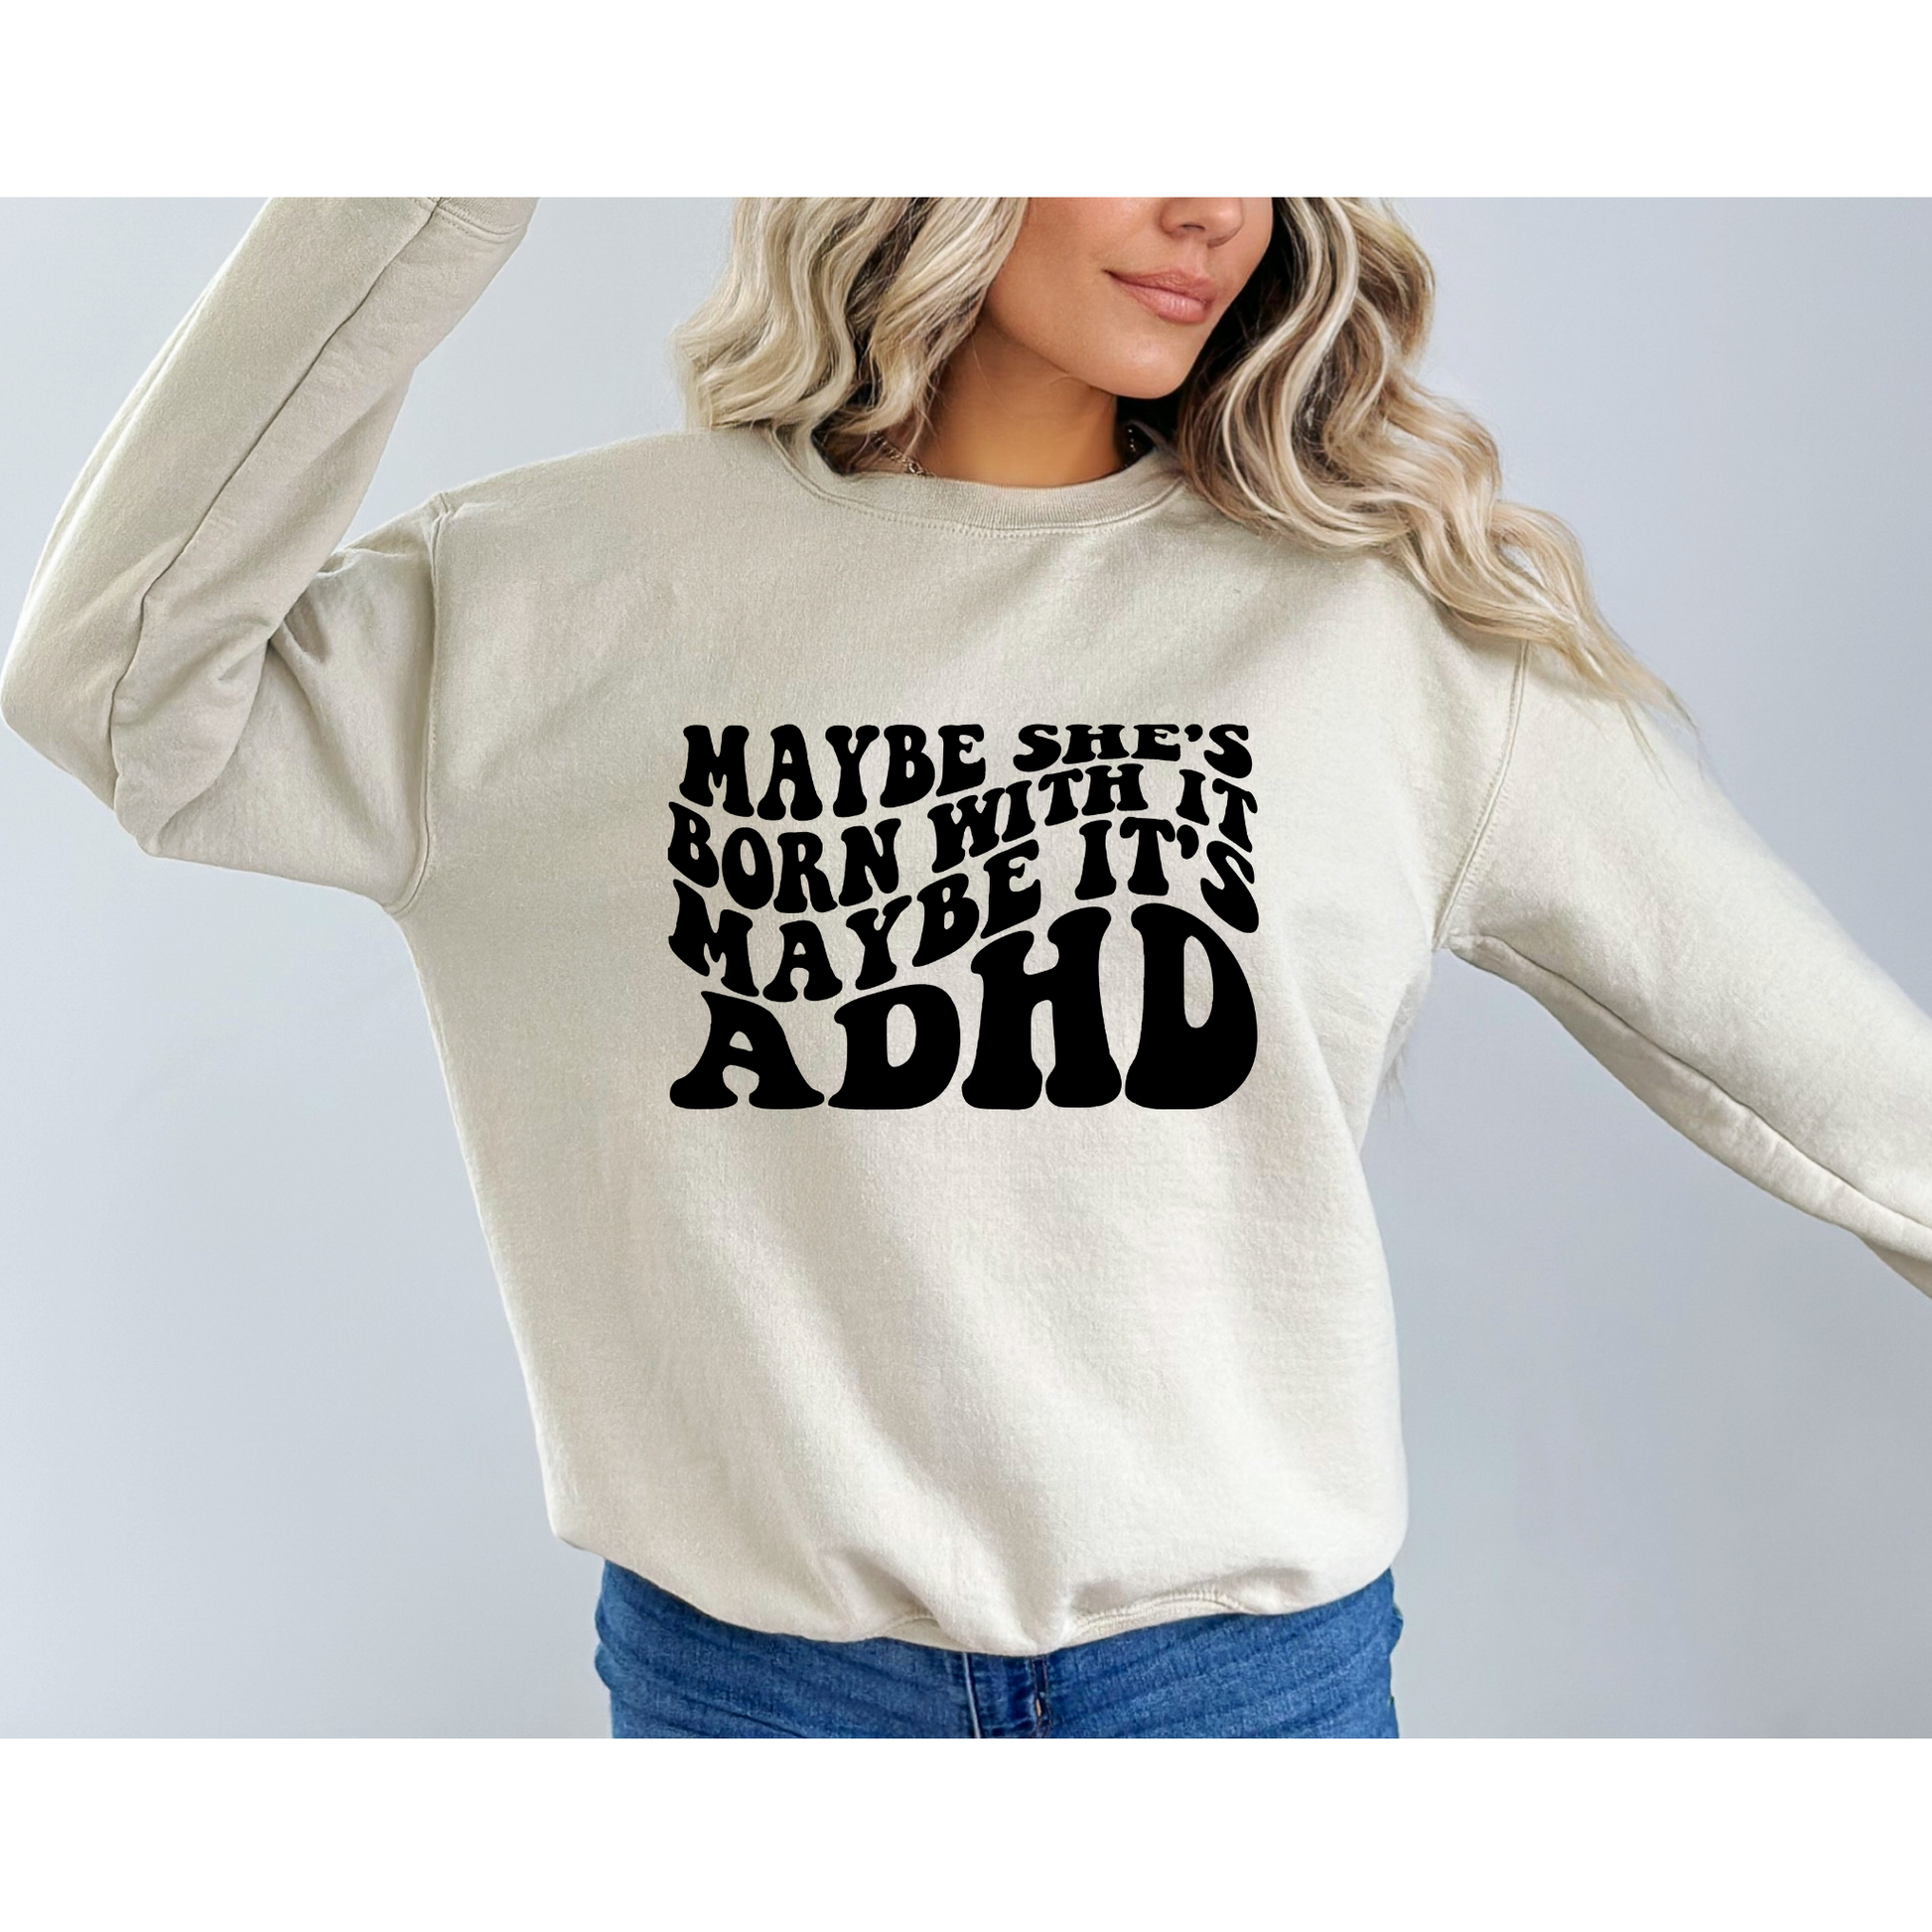 Maybe She's Born With It Maybe It's ADHD Crewneck Sweatshirt Sand